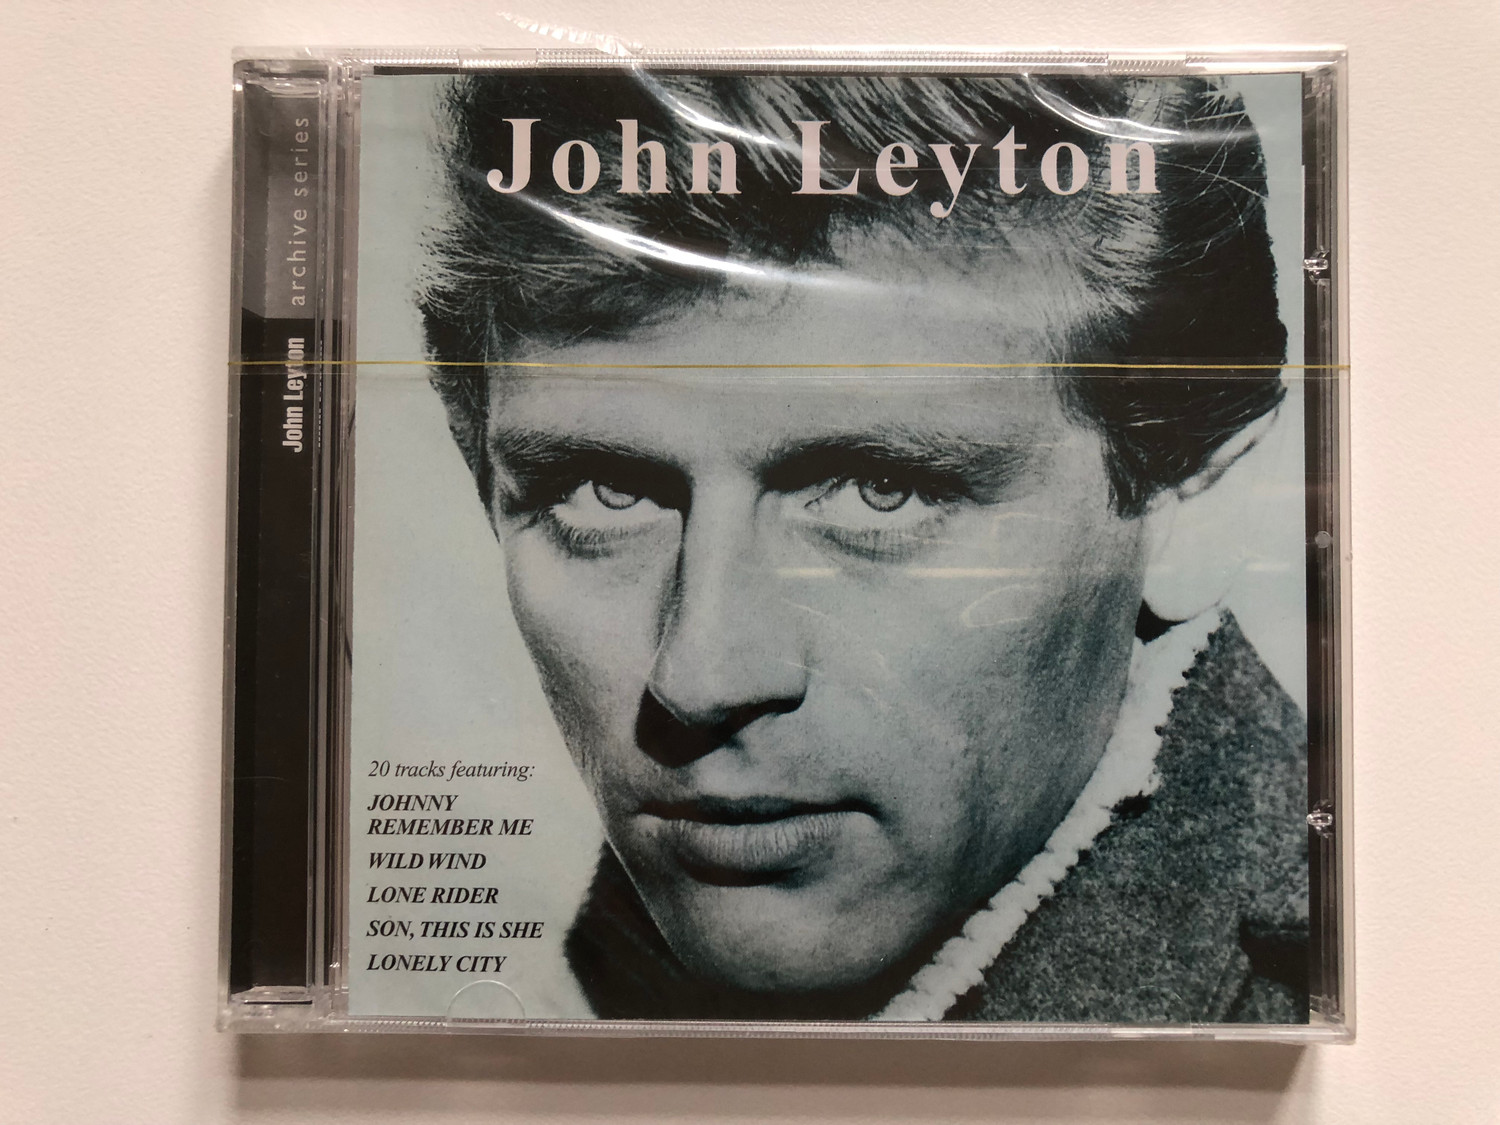 John Leyton – Archive Series / 20 tracks featuring: Johnny Remember Me;  Wild Wind